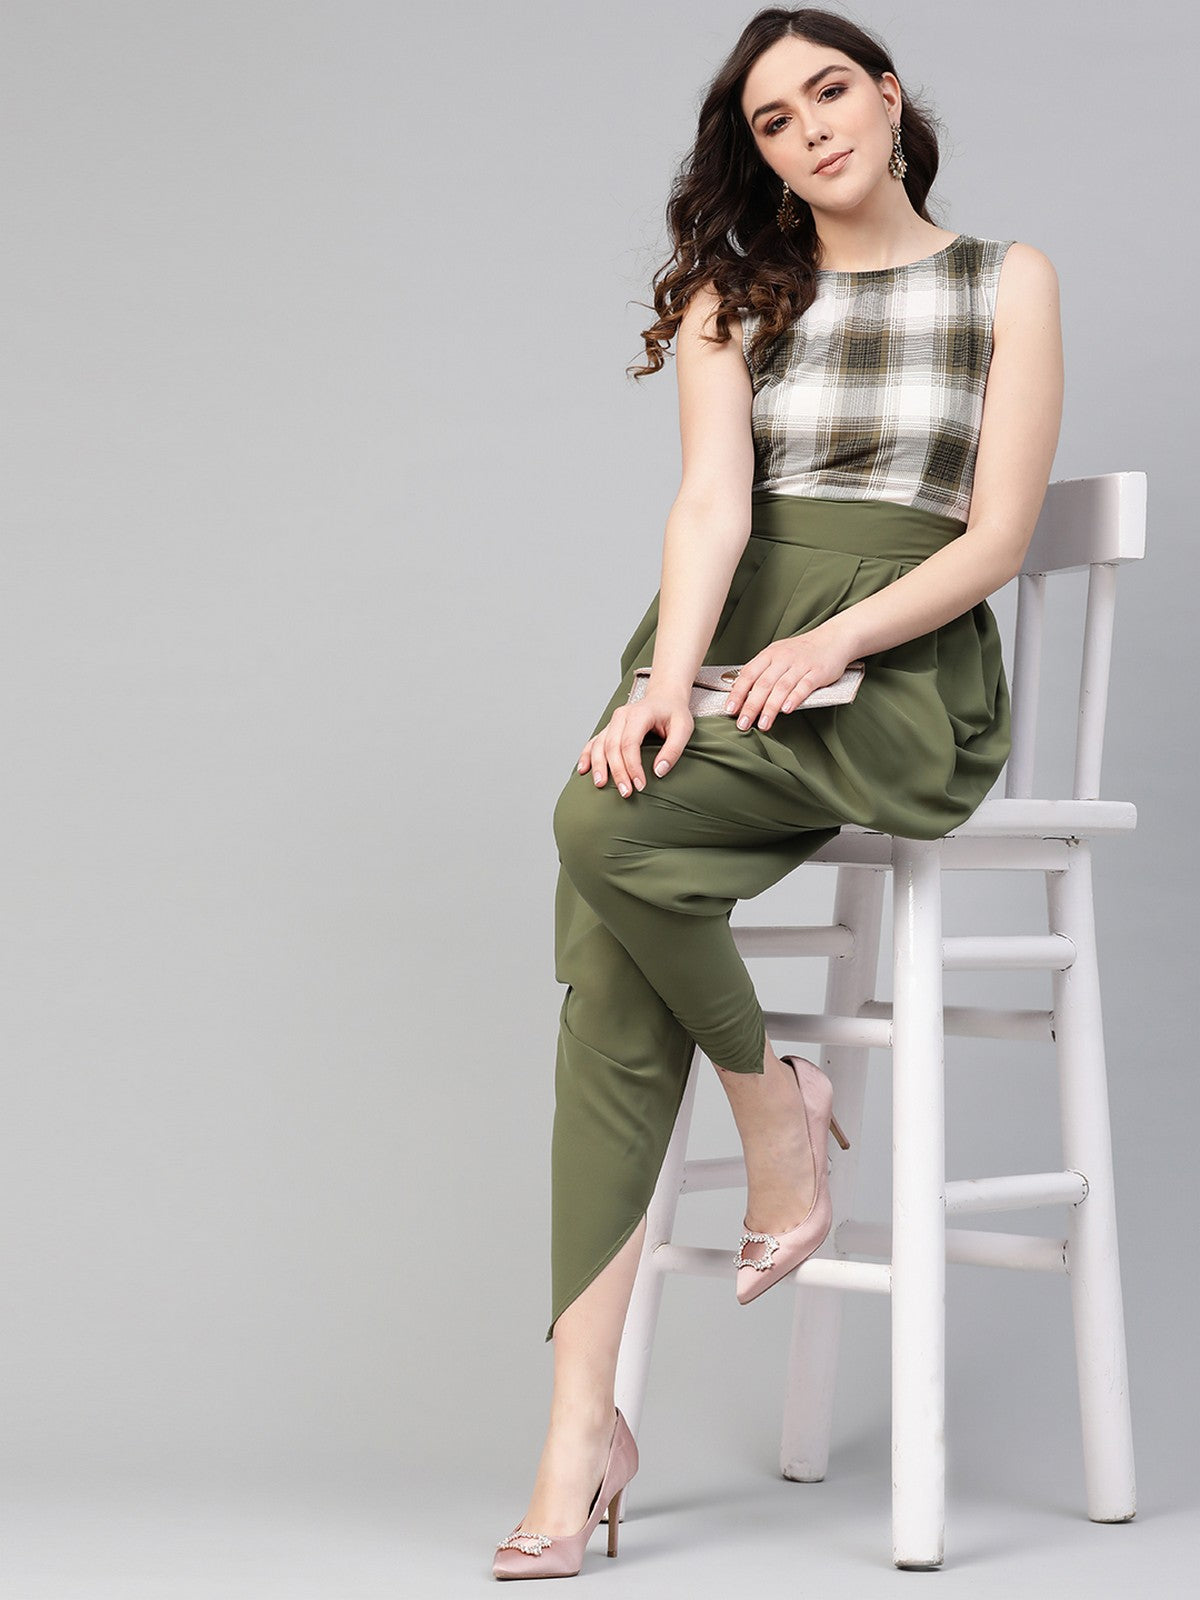 Olive Checkered Cowl Jumpsuit